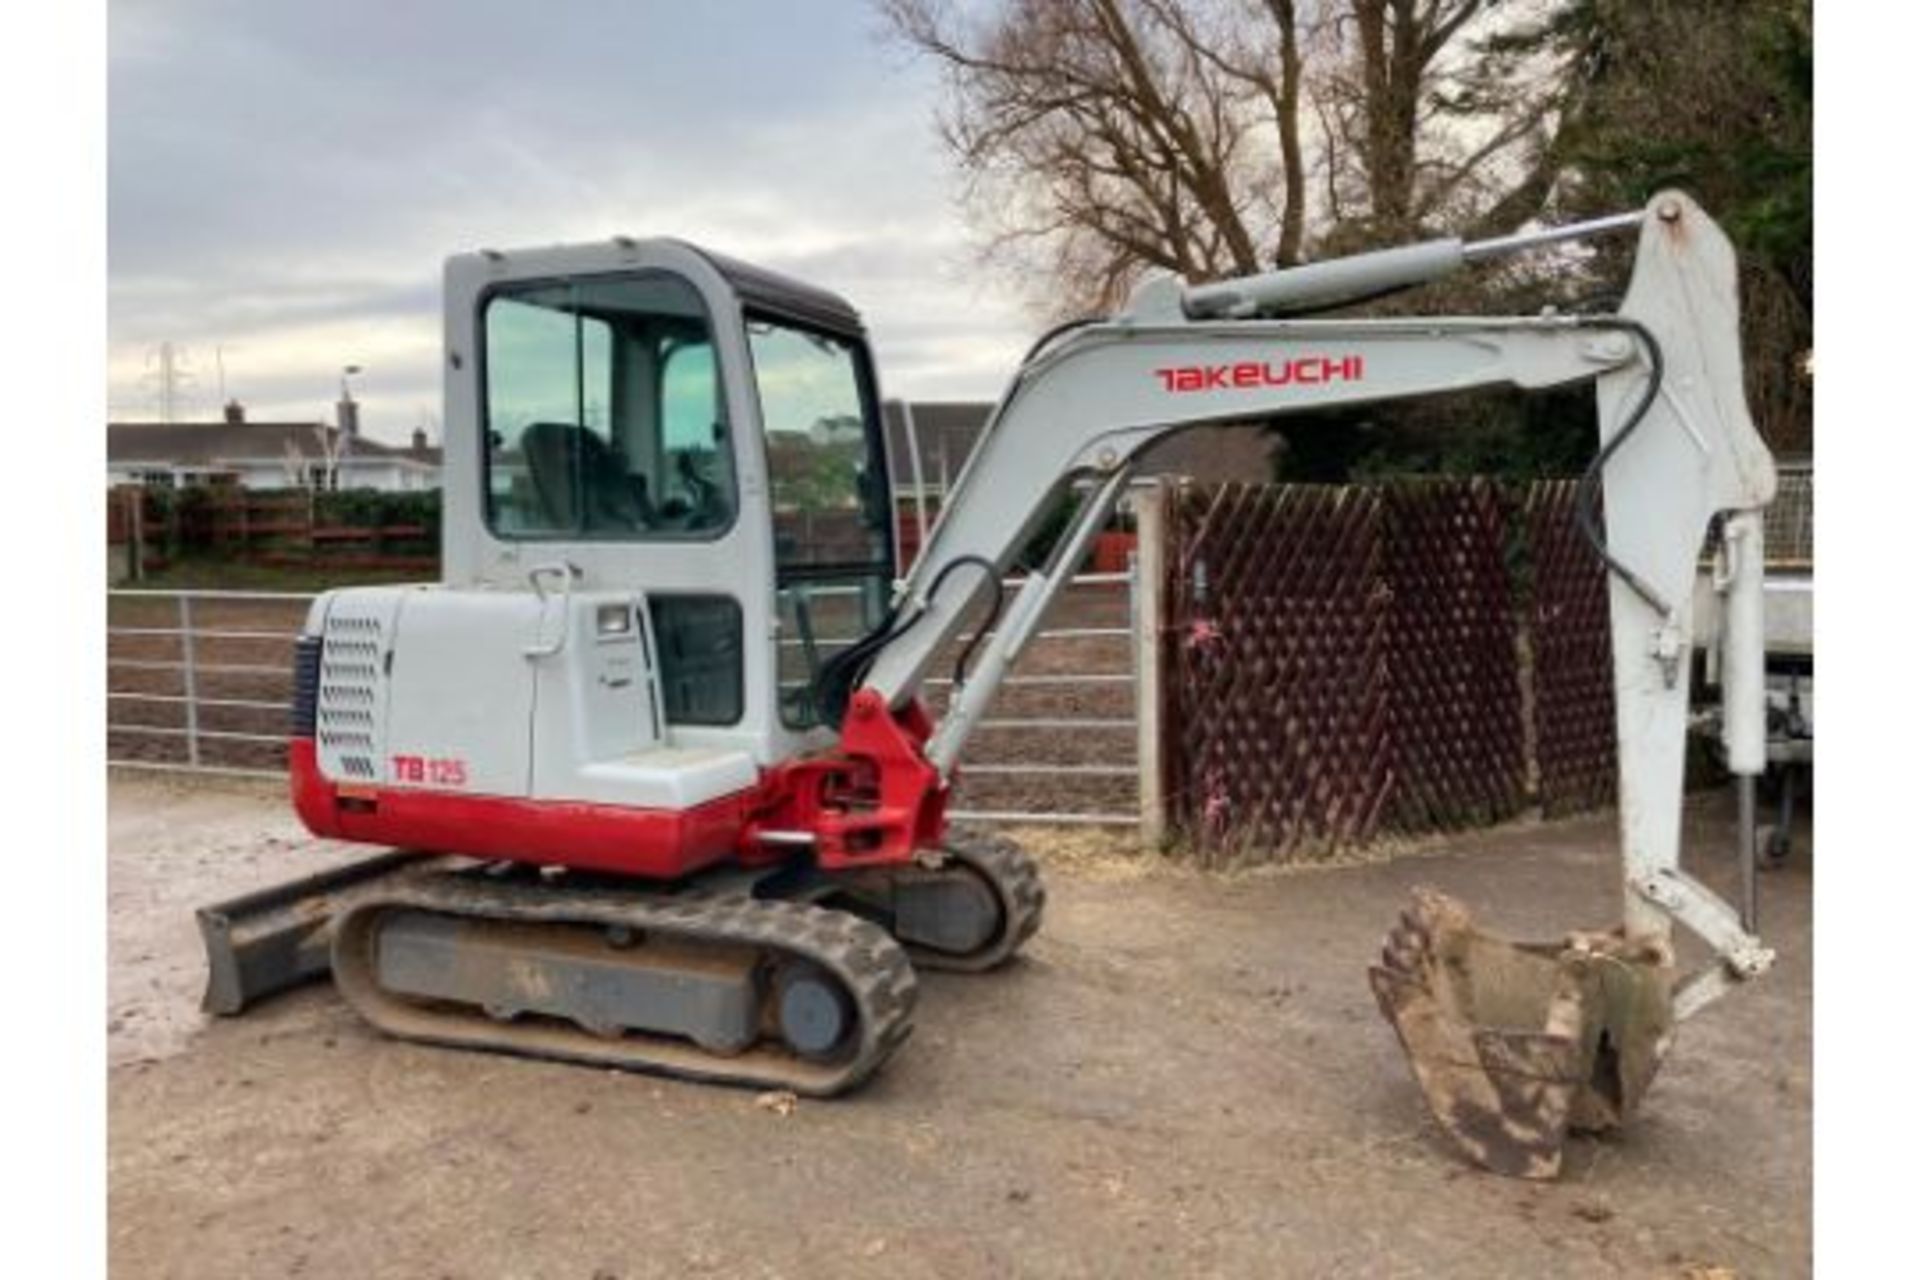 TAKEUCHI MINI DIGGER 3 TON .ONLY 1300 HOURS FROM NEW .PLUS VAT LOCATED IN NORTHERN IRELAND. - Image 4 of 5